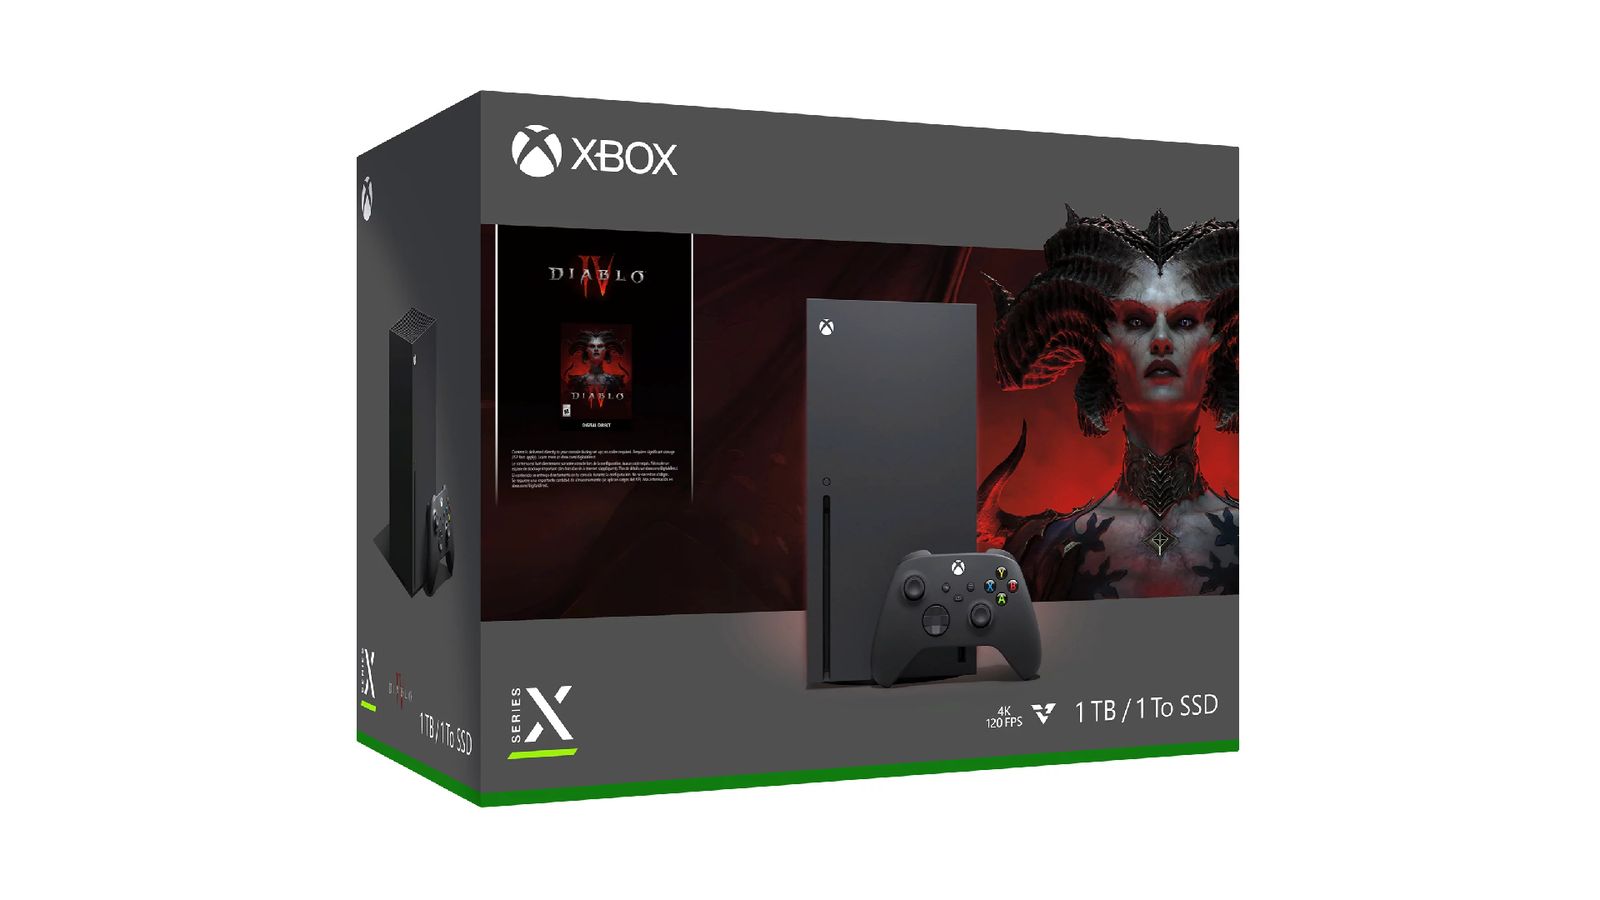 A dark grey box with green trim featuring the Diablo IV cover art in red next to an image of a Xbox Series X.